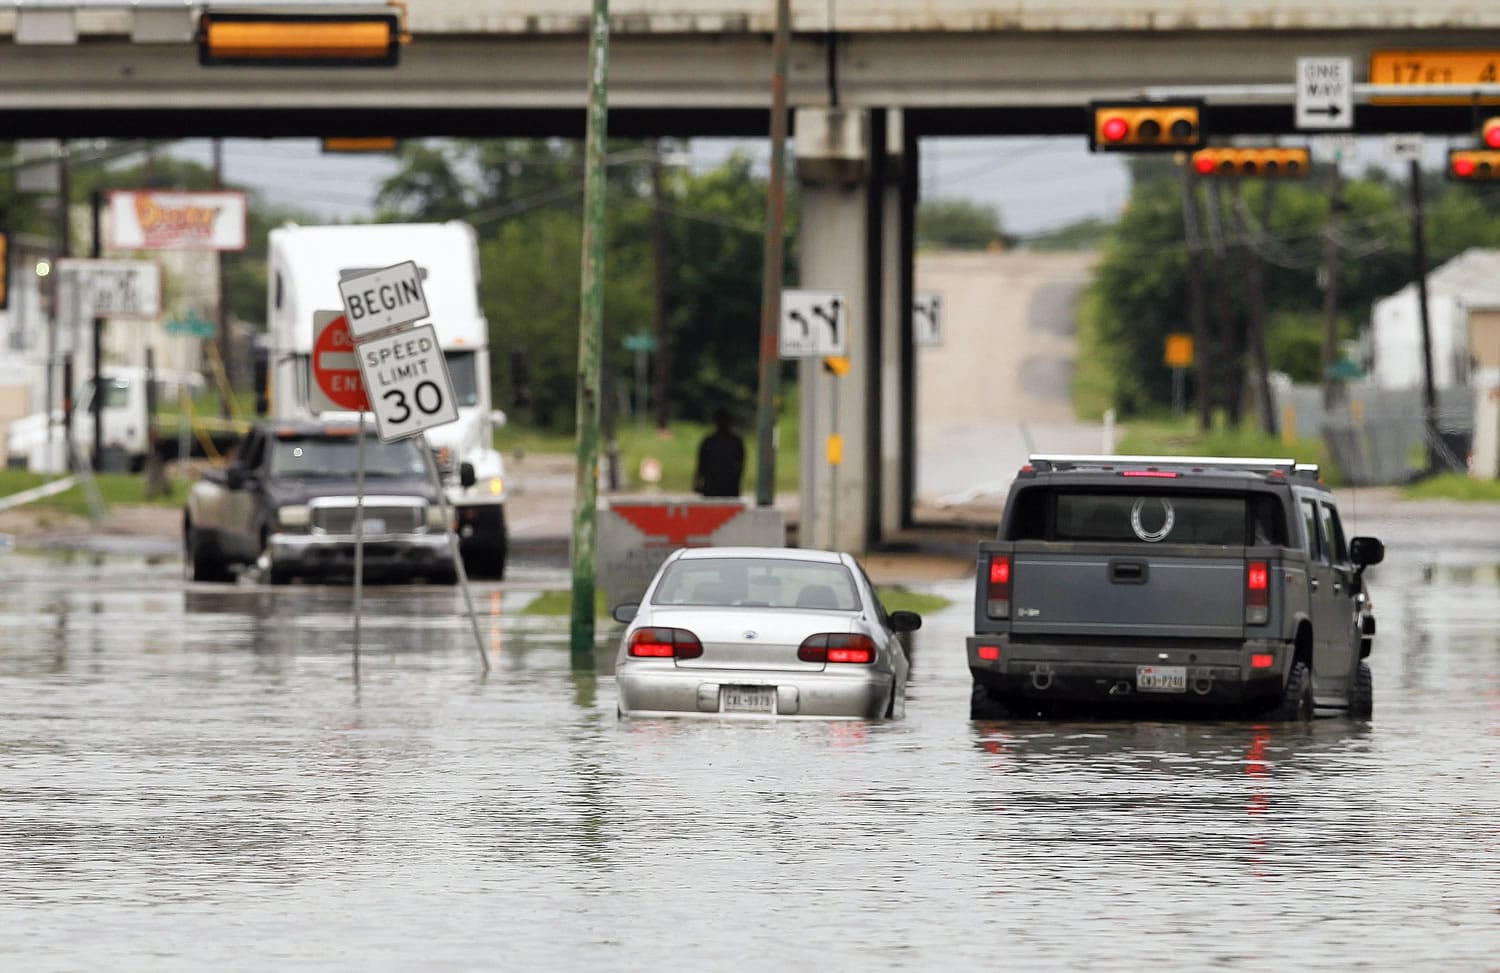 A motorist stops to help another driver stranded in high water in Dallas on Saturday.